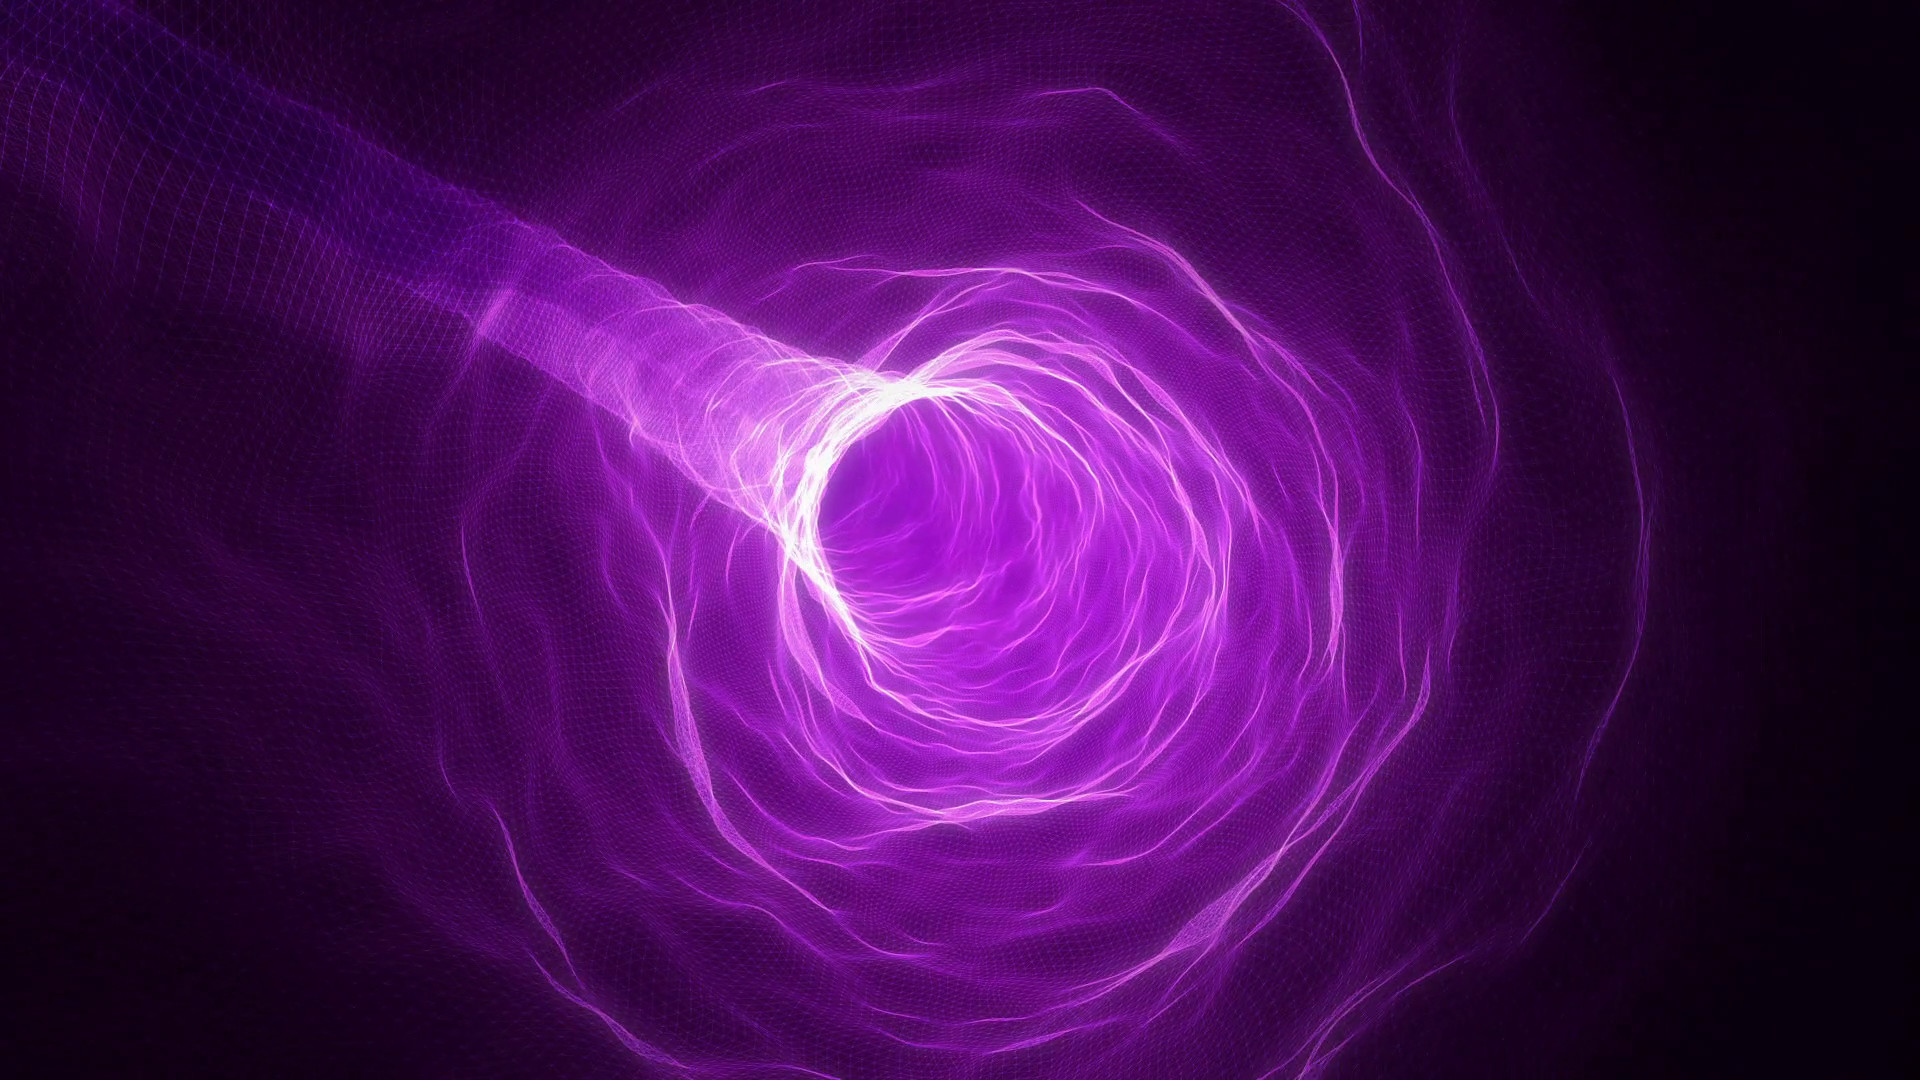 1920x1080 Flying in a Curved Tunnel of Light | Fly Through a Wormhole or Time Vortex  | Portal or Gateway to After Life | Seamless Looping Motion Background |  Full HD ...